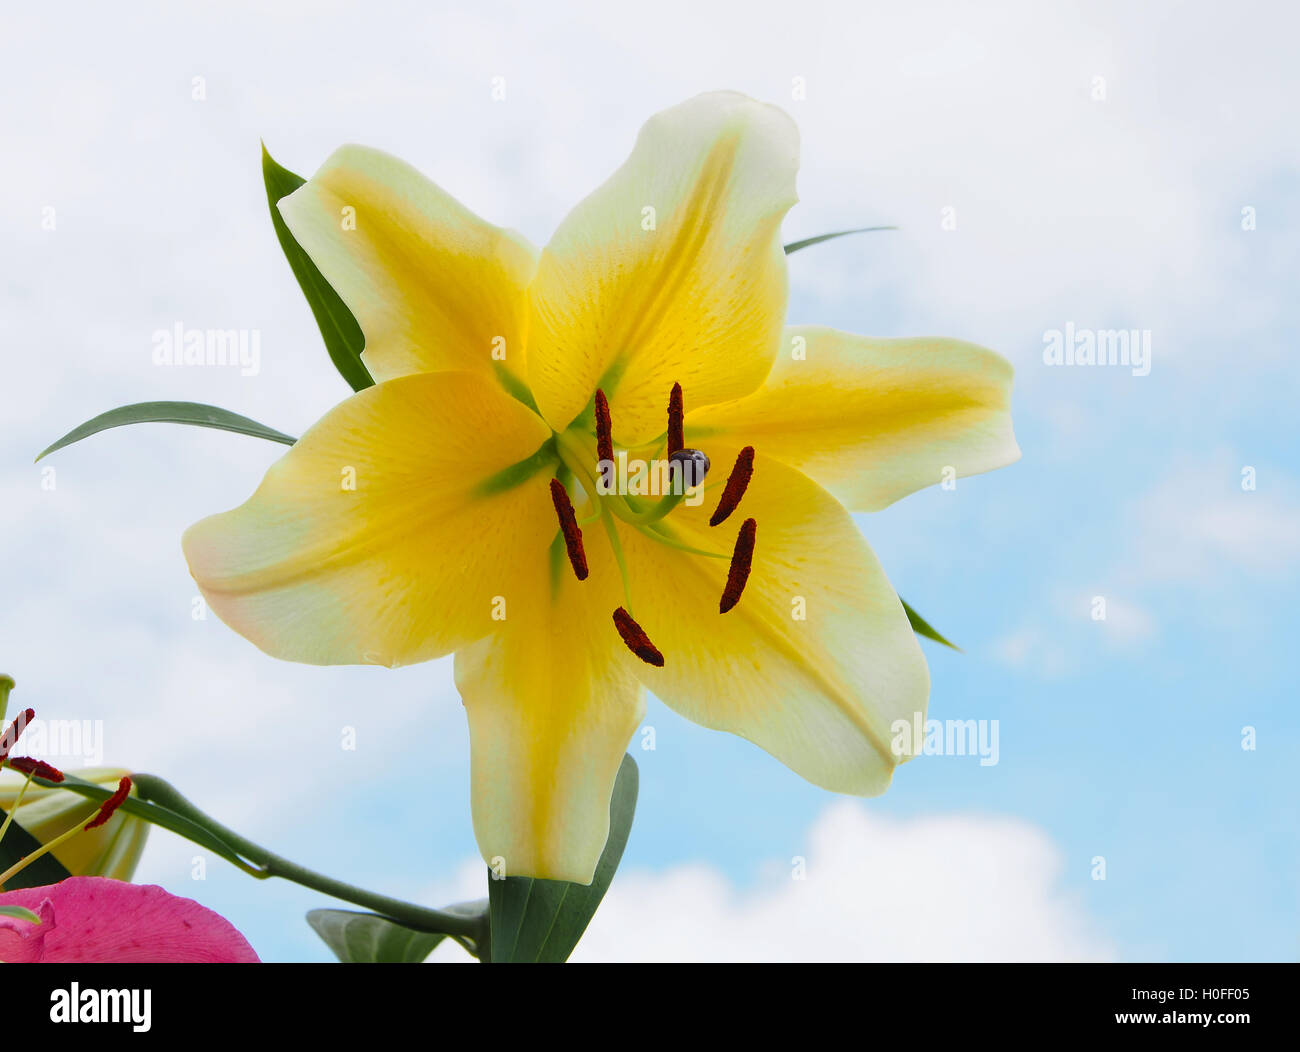 Yellow oriental lily against a blue sky with white fluffy clouds Stock Photo